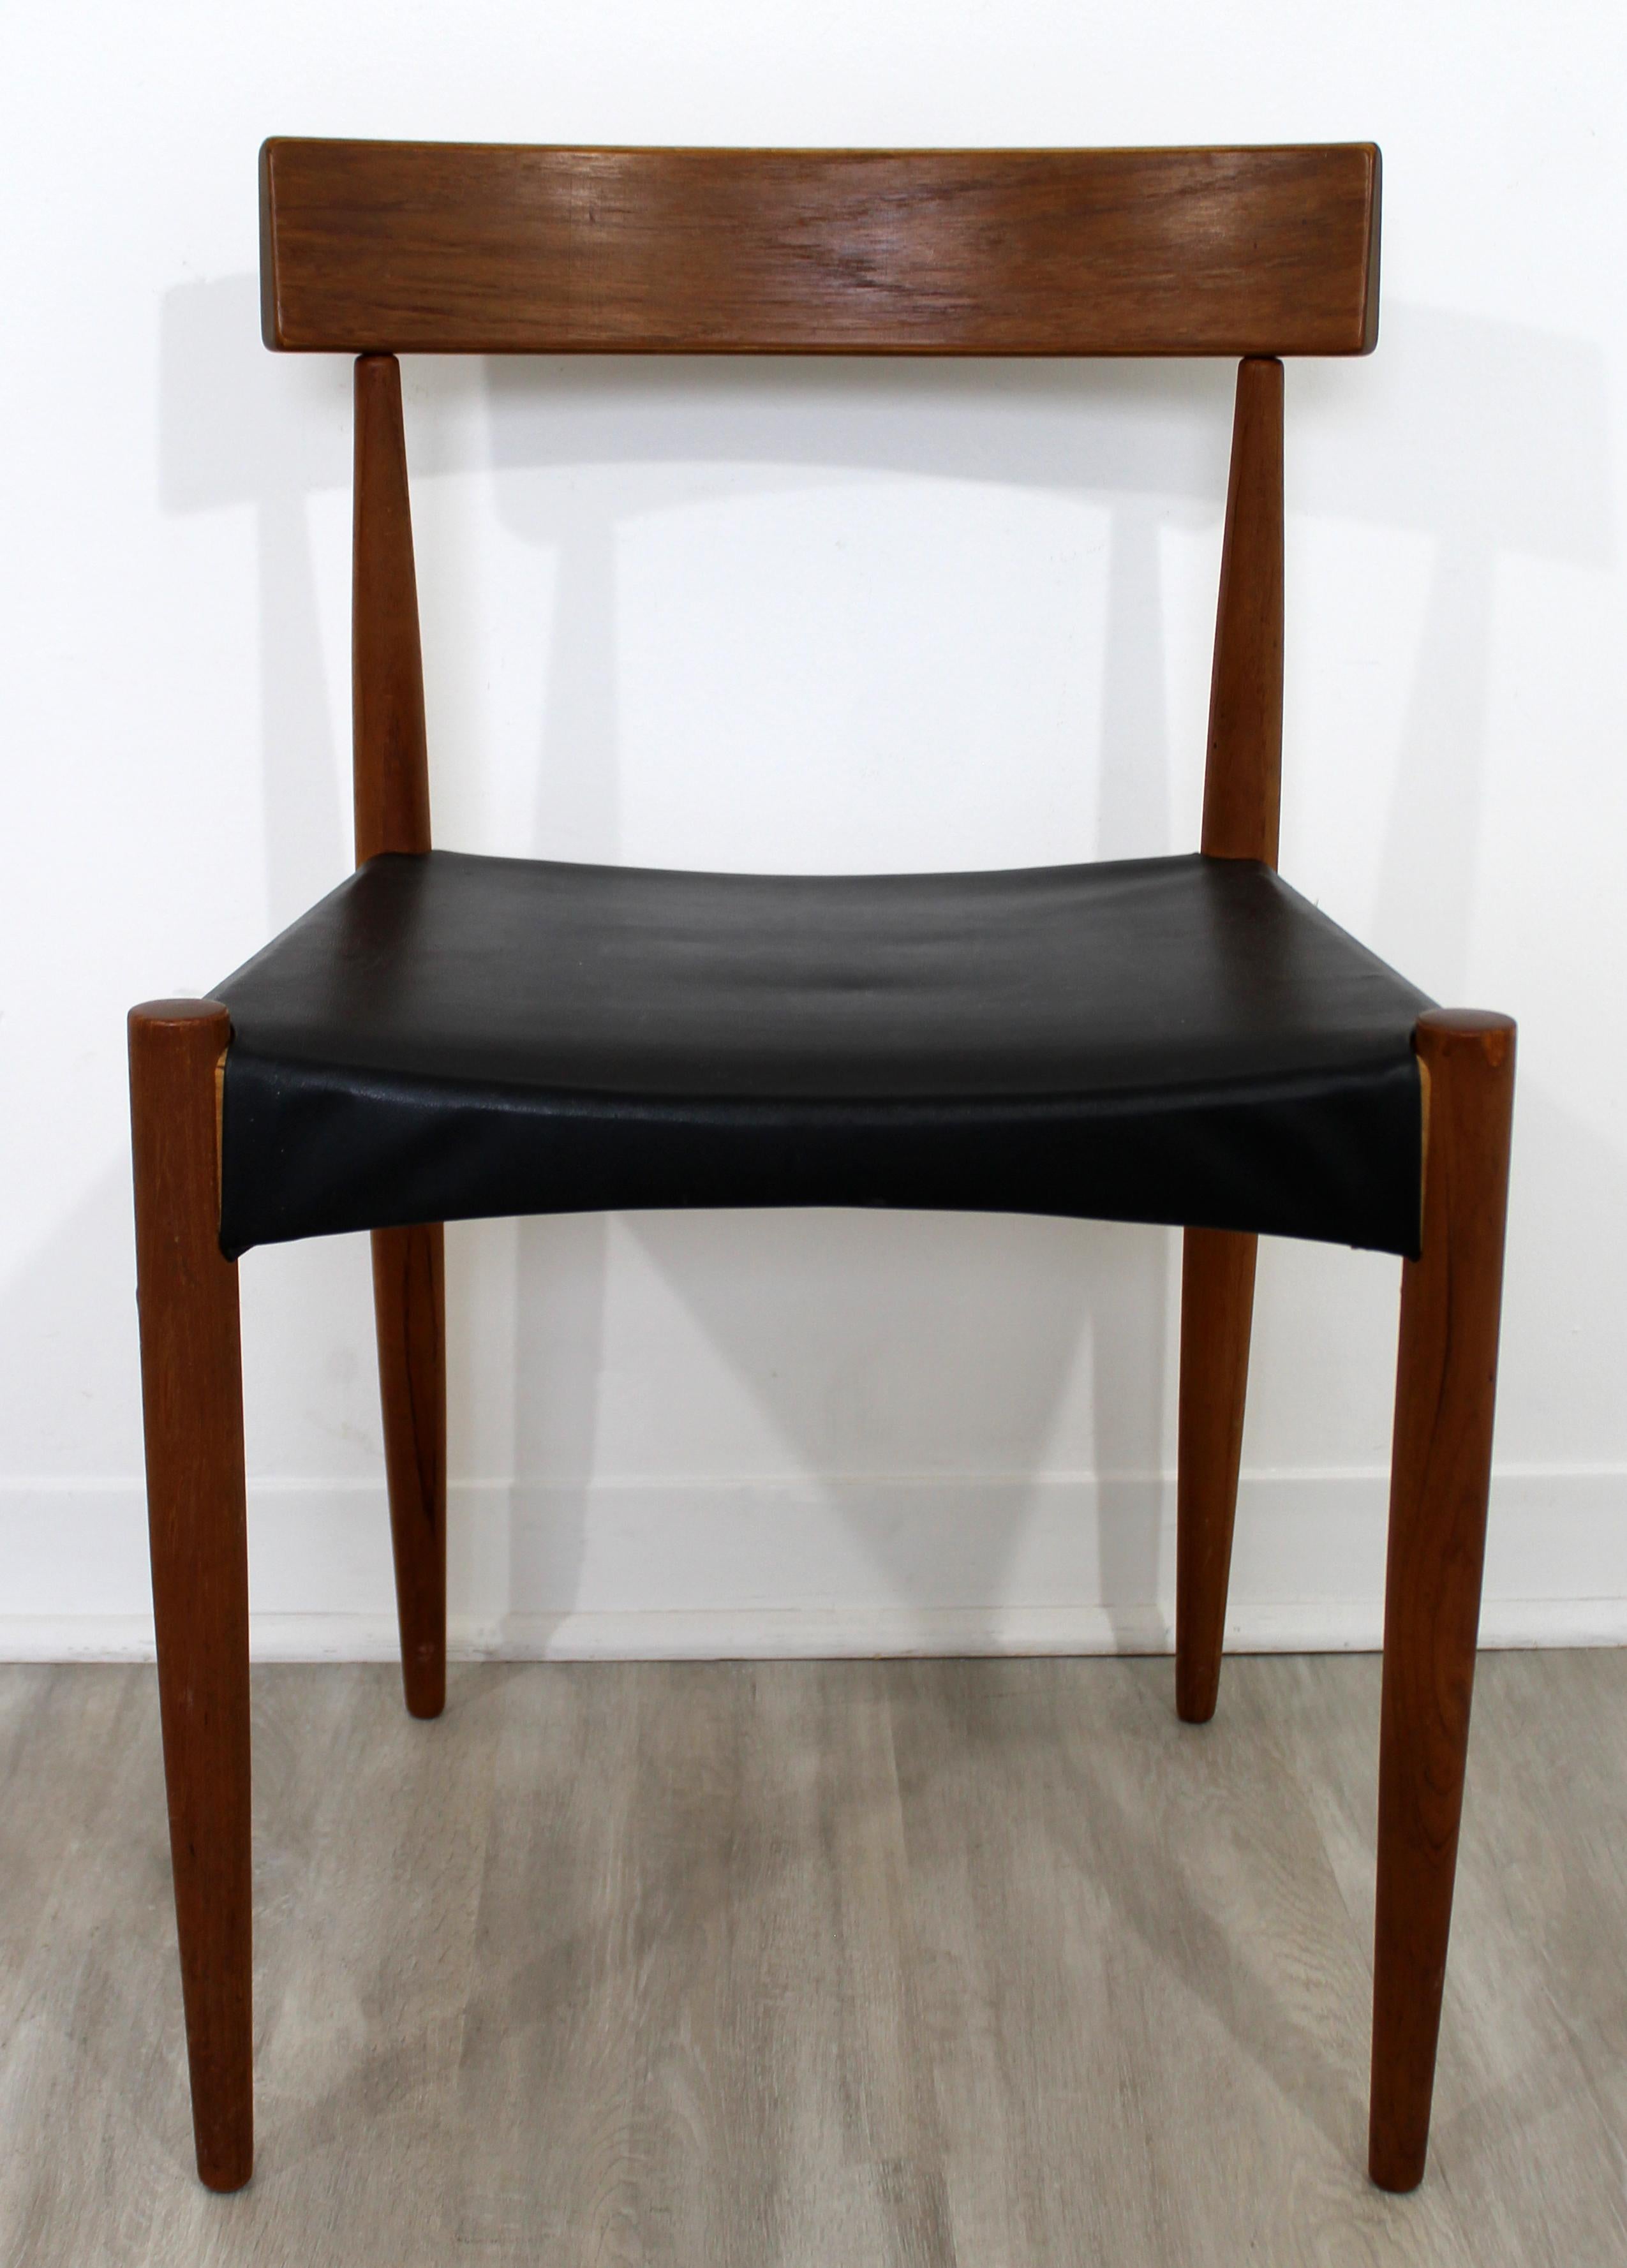 Mid-Century Modern Danish Leather Top Expandable Dinette Dining Table 4 Chairs 8